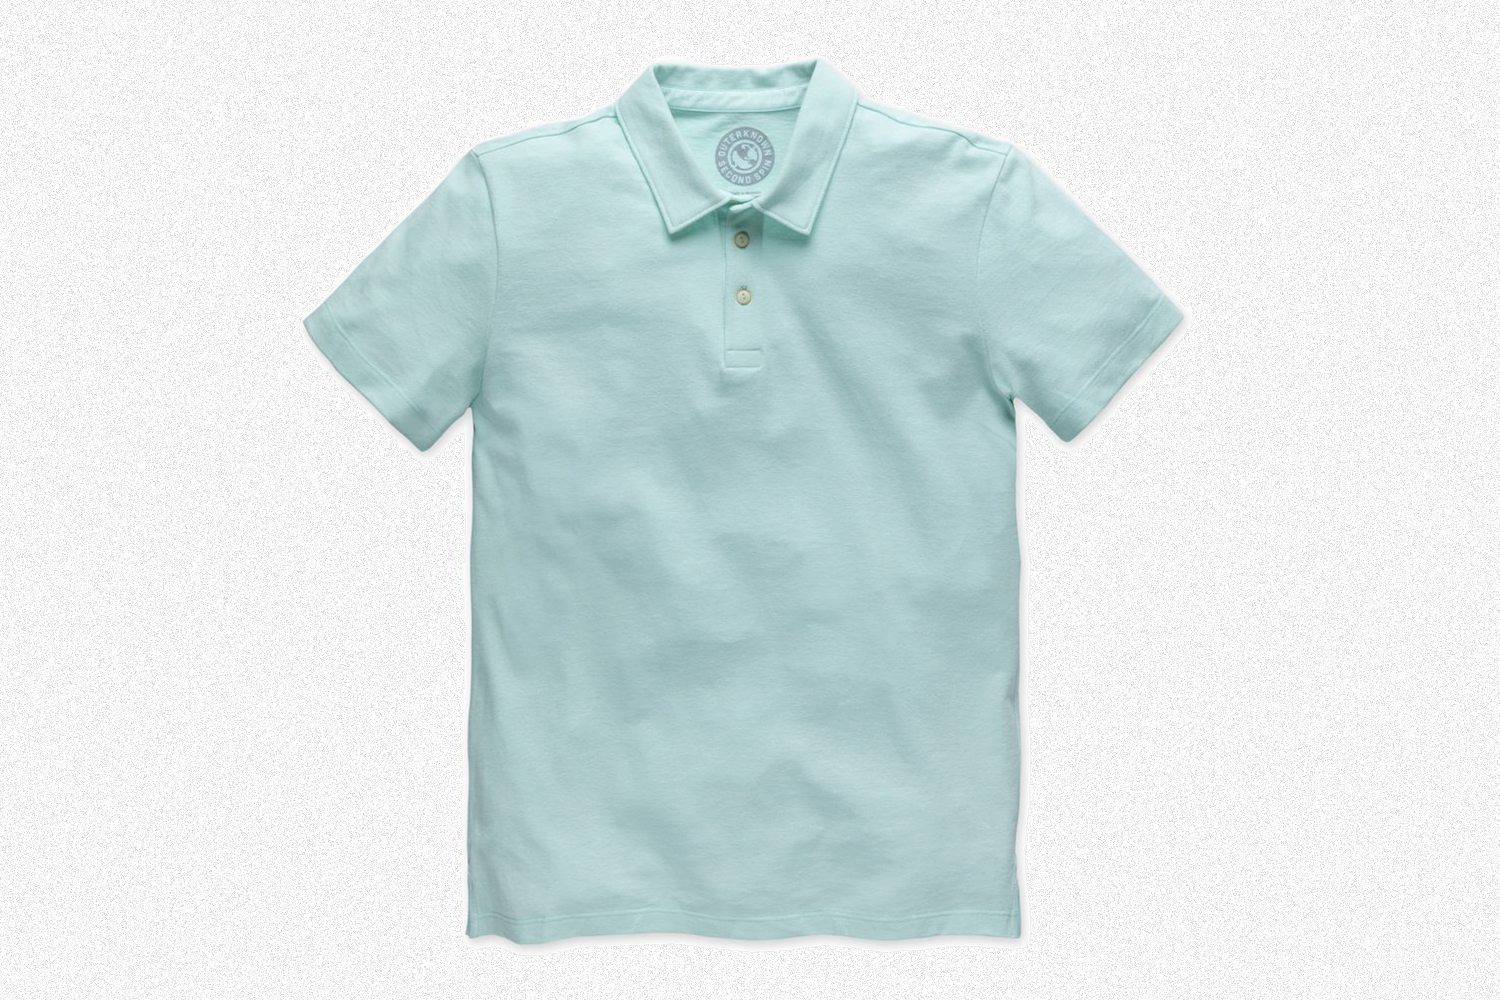 A light blue men's polo from Kelly Slater's brand Outerknown